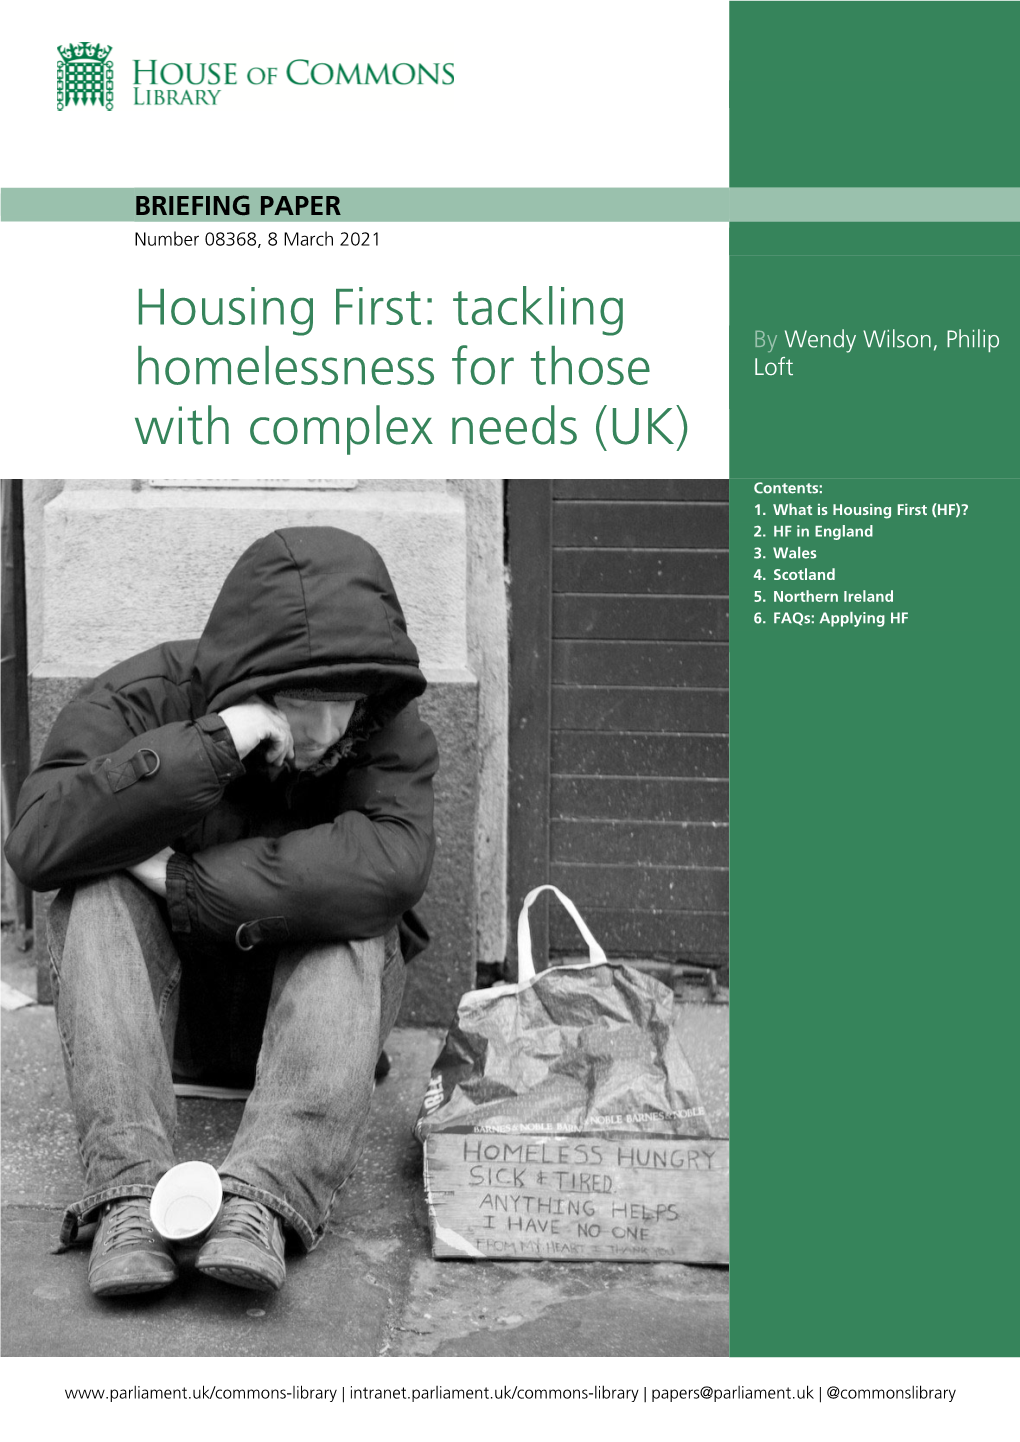 Housing First: Tackling Homelessness for Those with Complex Needs (UK)